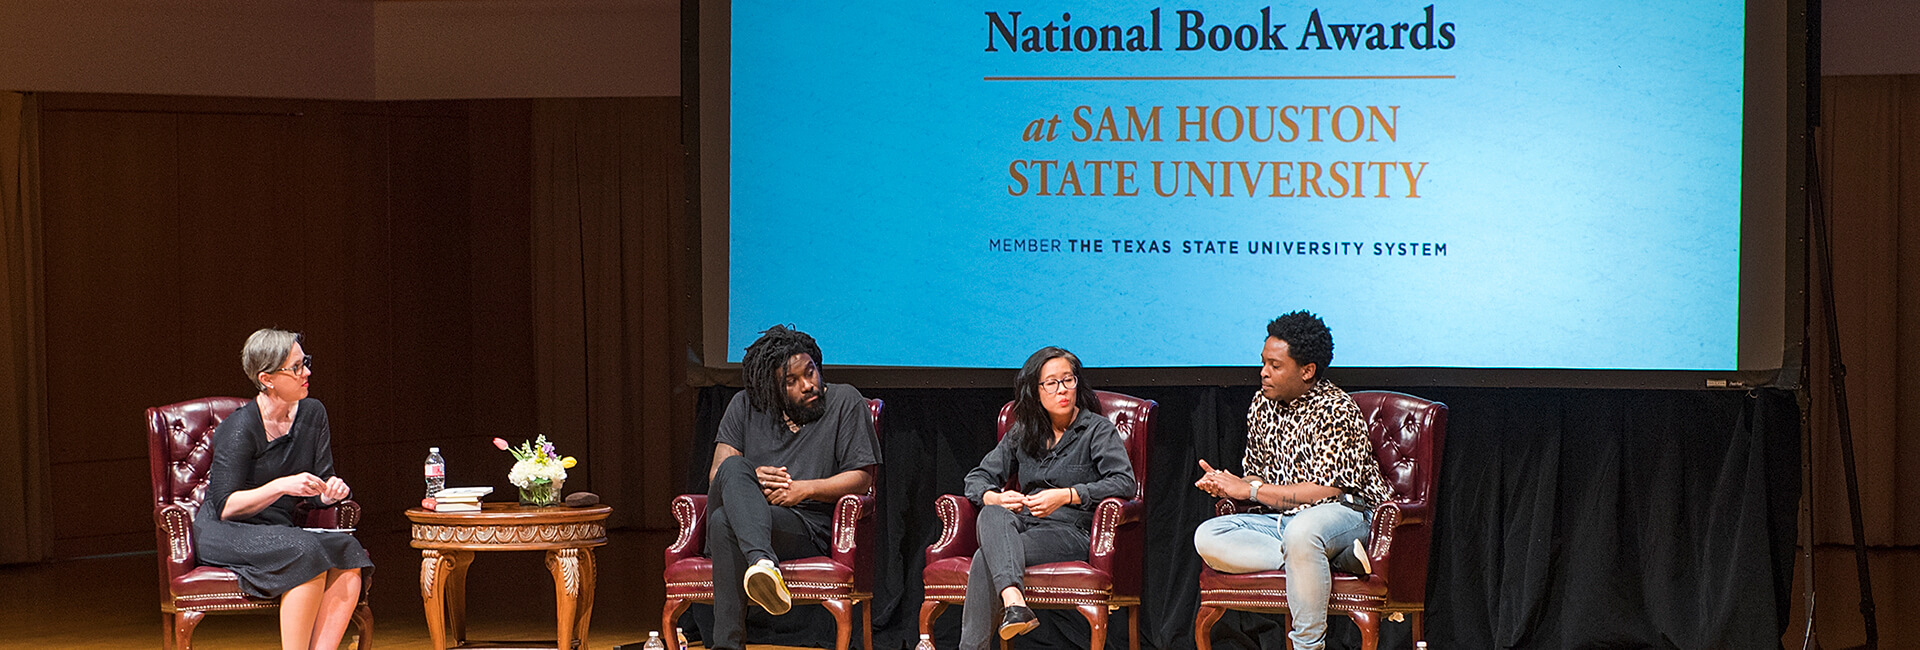 National Book Awards Stage with 4 people sitting in chairs